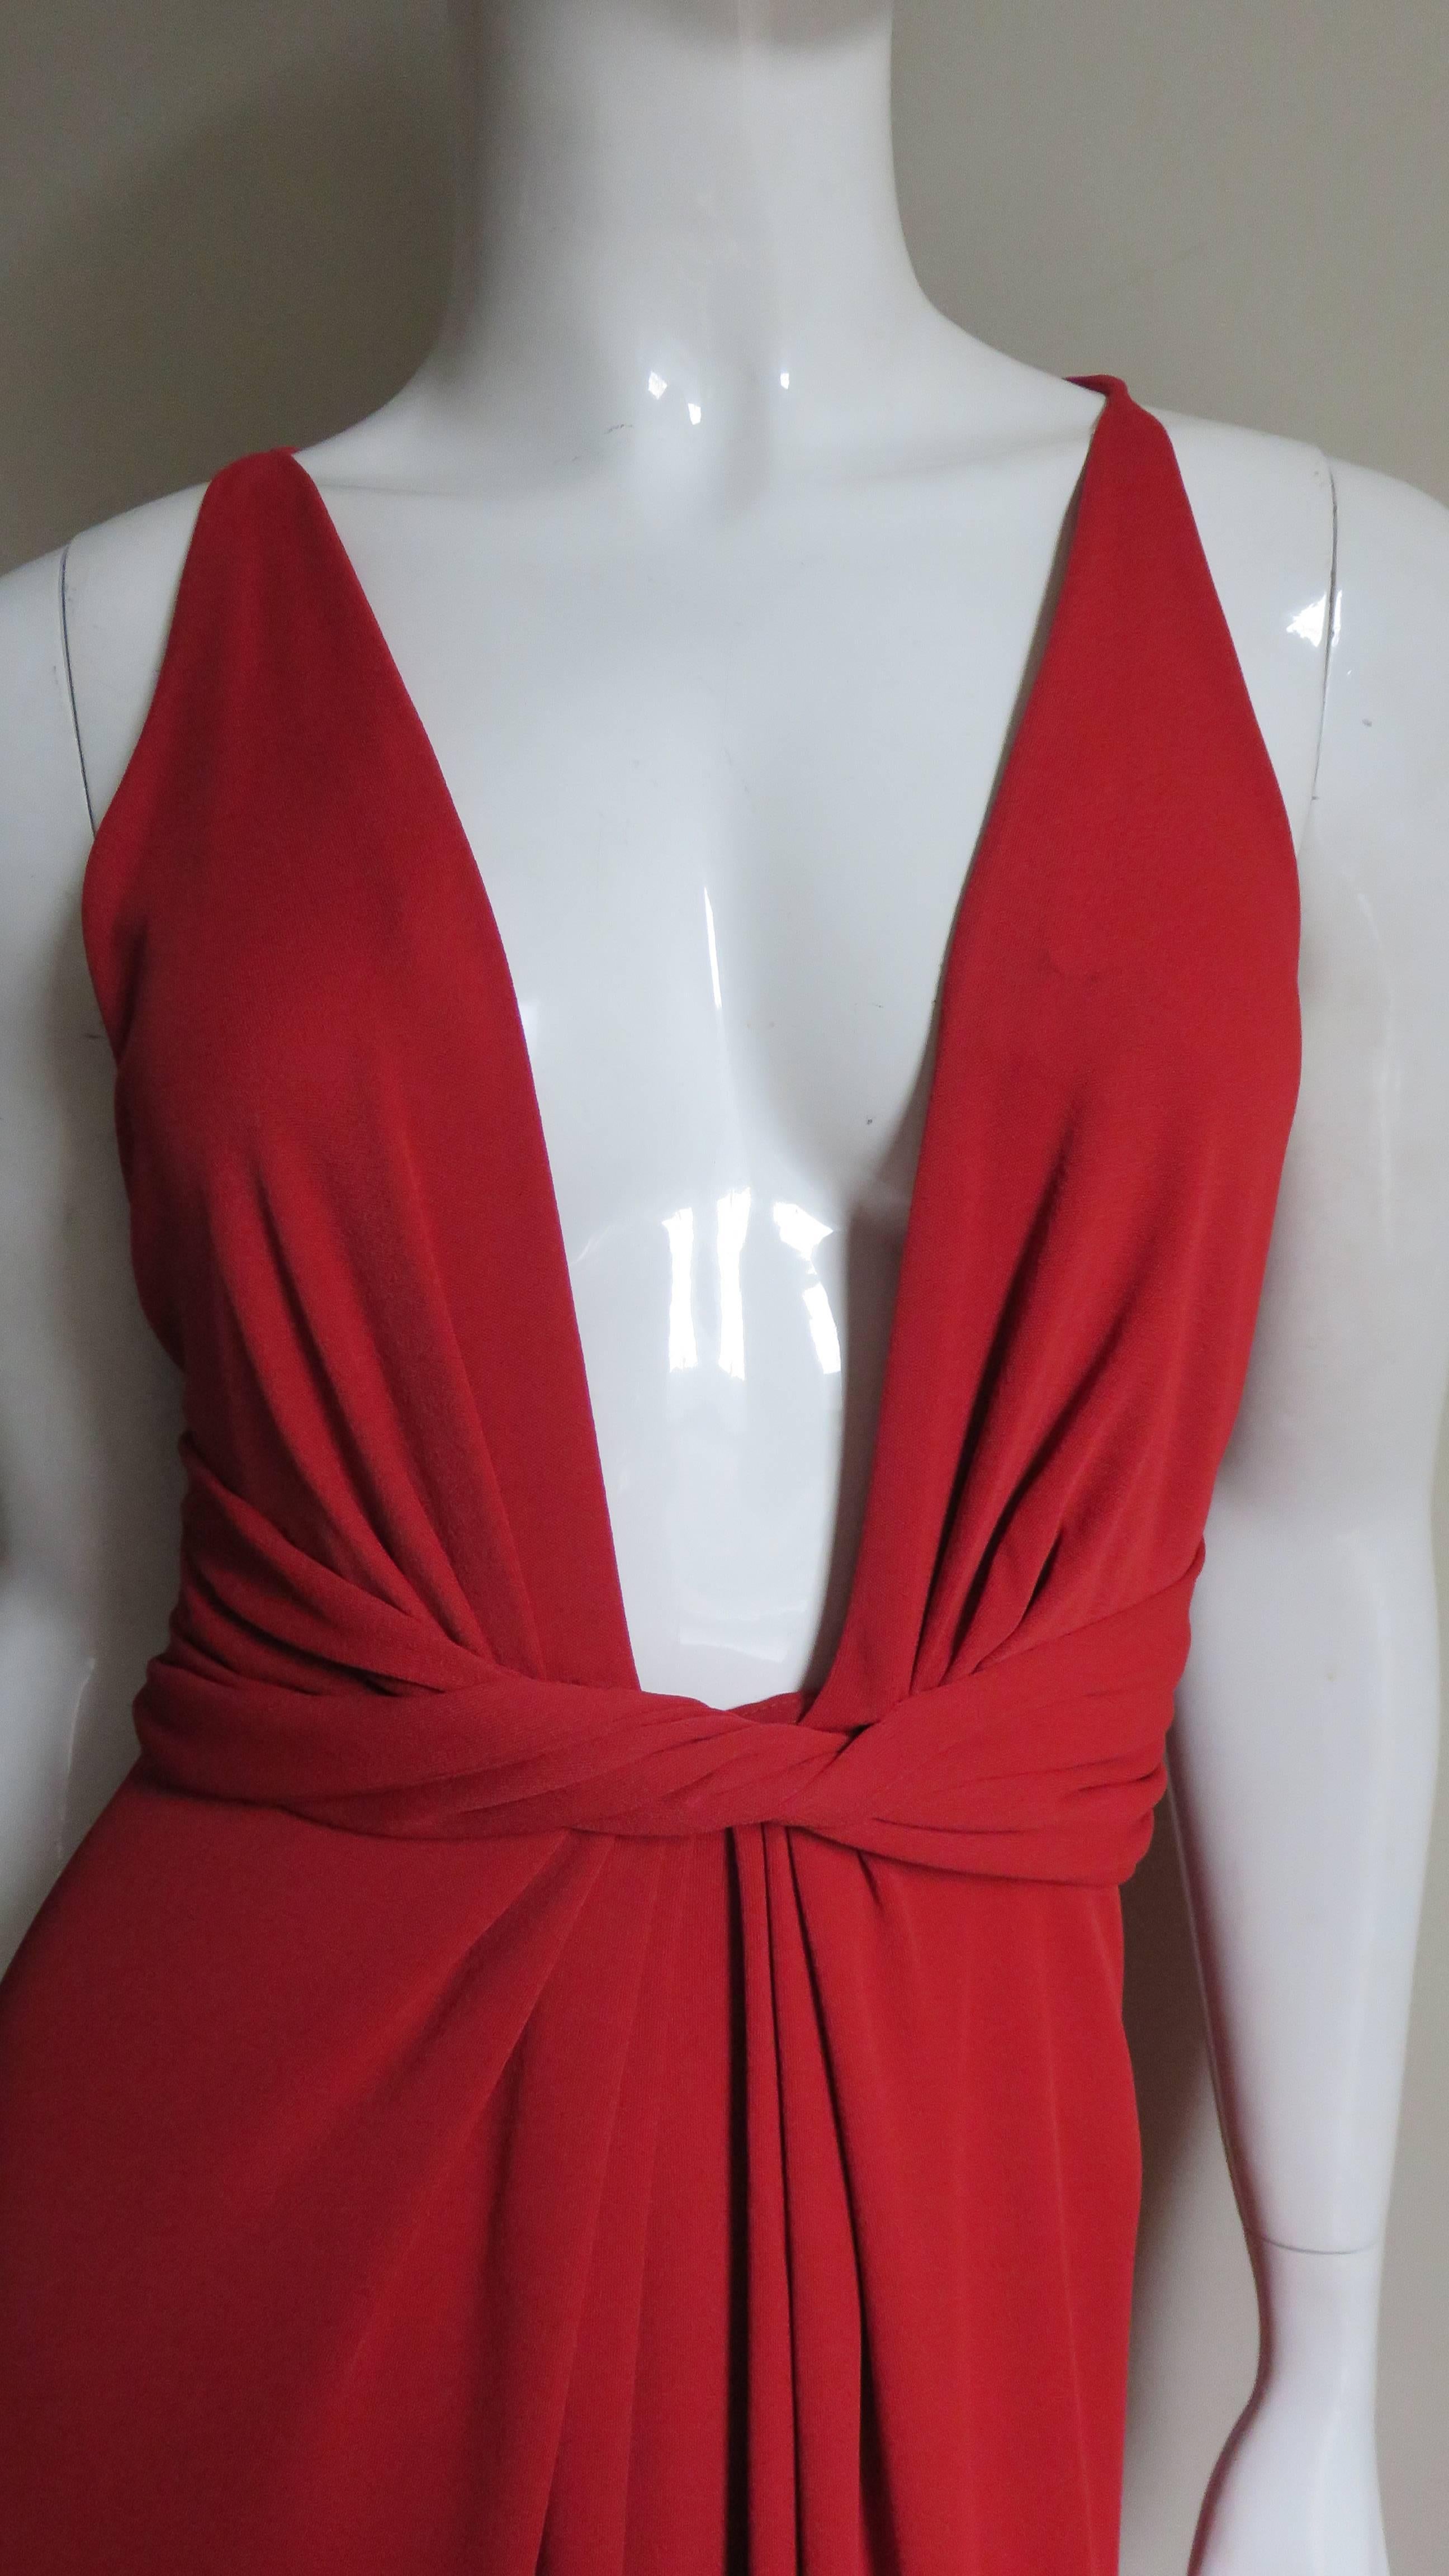 A fabulous rich red jersey gown from Gucci.  It has a plunging front neckline with cut in shoulders and a twisted ruched waist band to accentuate the waist.  The straight skirt has center front fullness at the waist and a slit at the center back